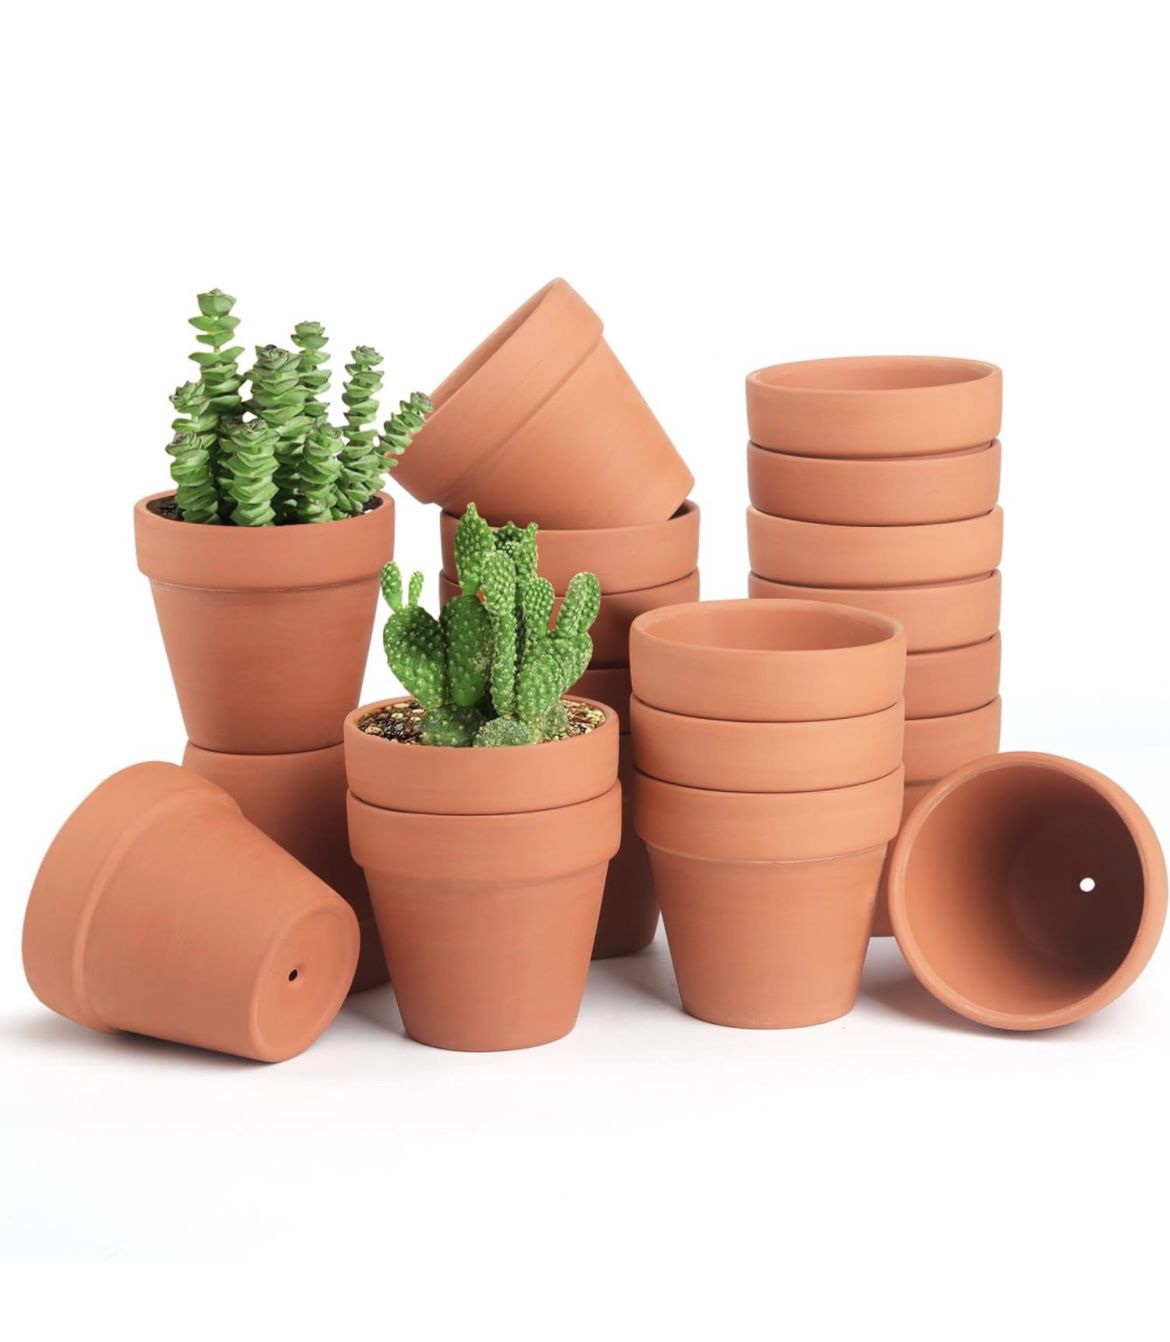 3 Inch Terracotta Pots 20 Pack，Cactus Terra Cotta Flower Pots with Drainage，Succulent Nursery Clay Pots Great for Plants,DIY Crafts, Weddi